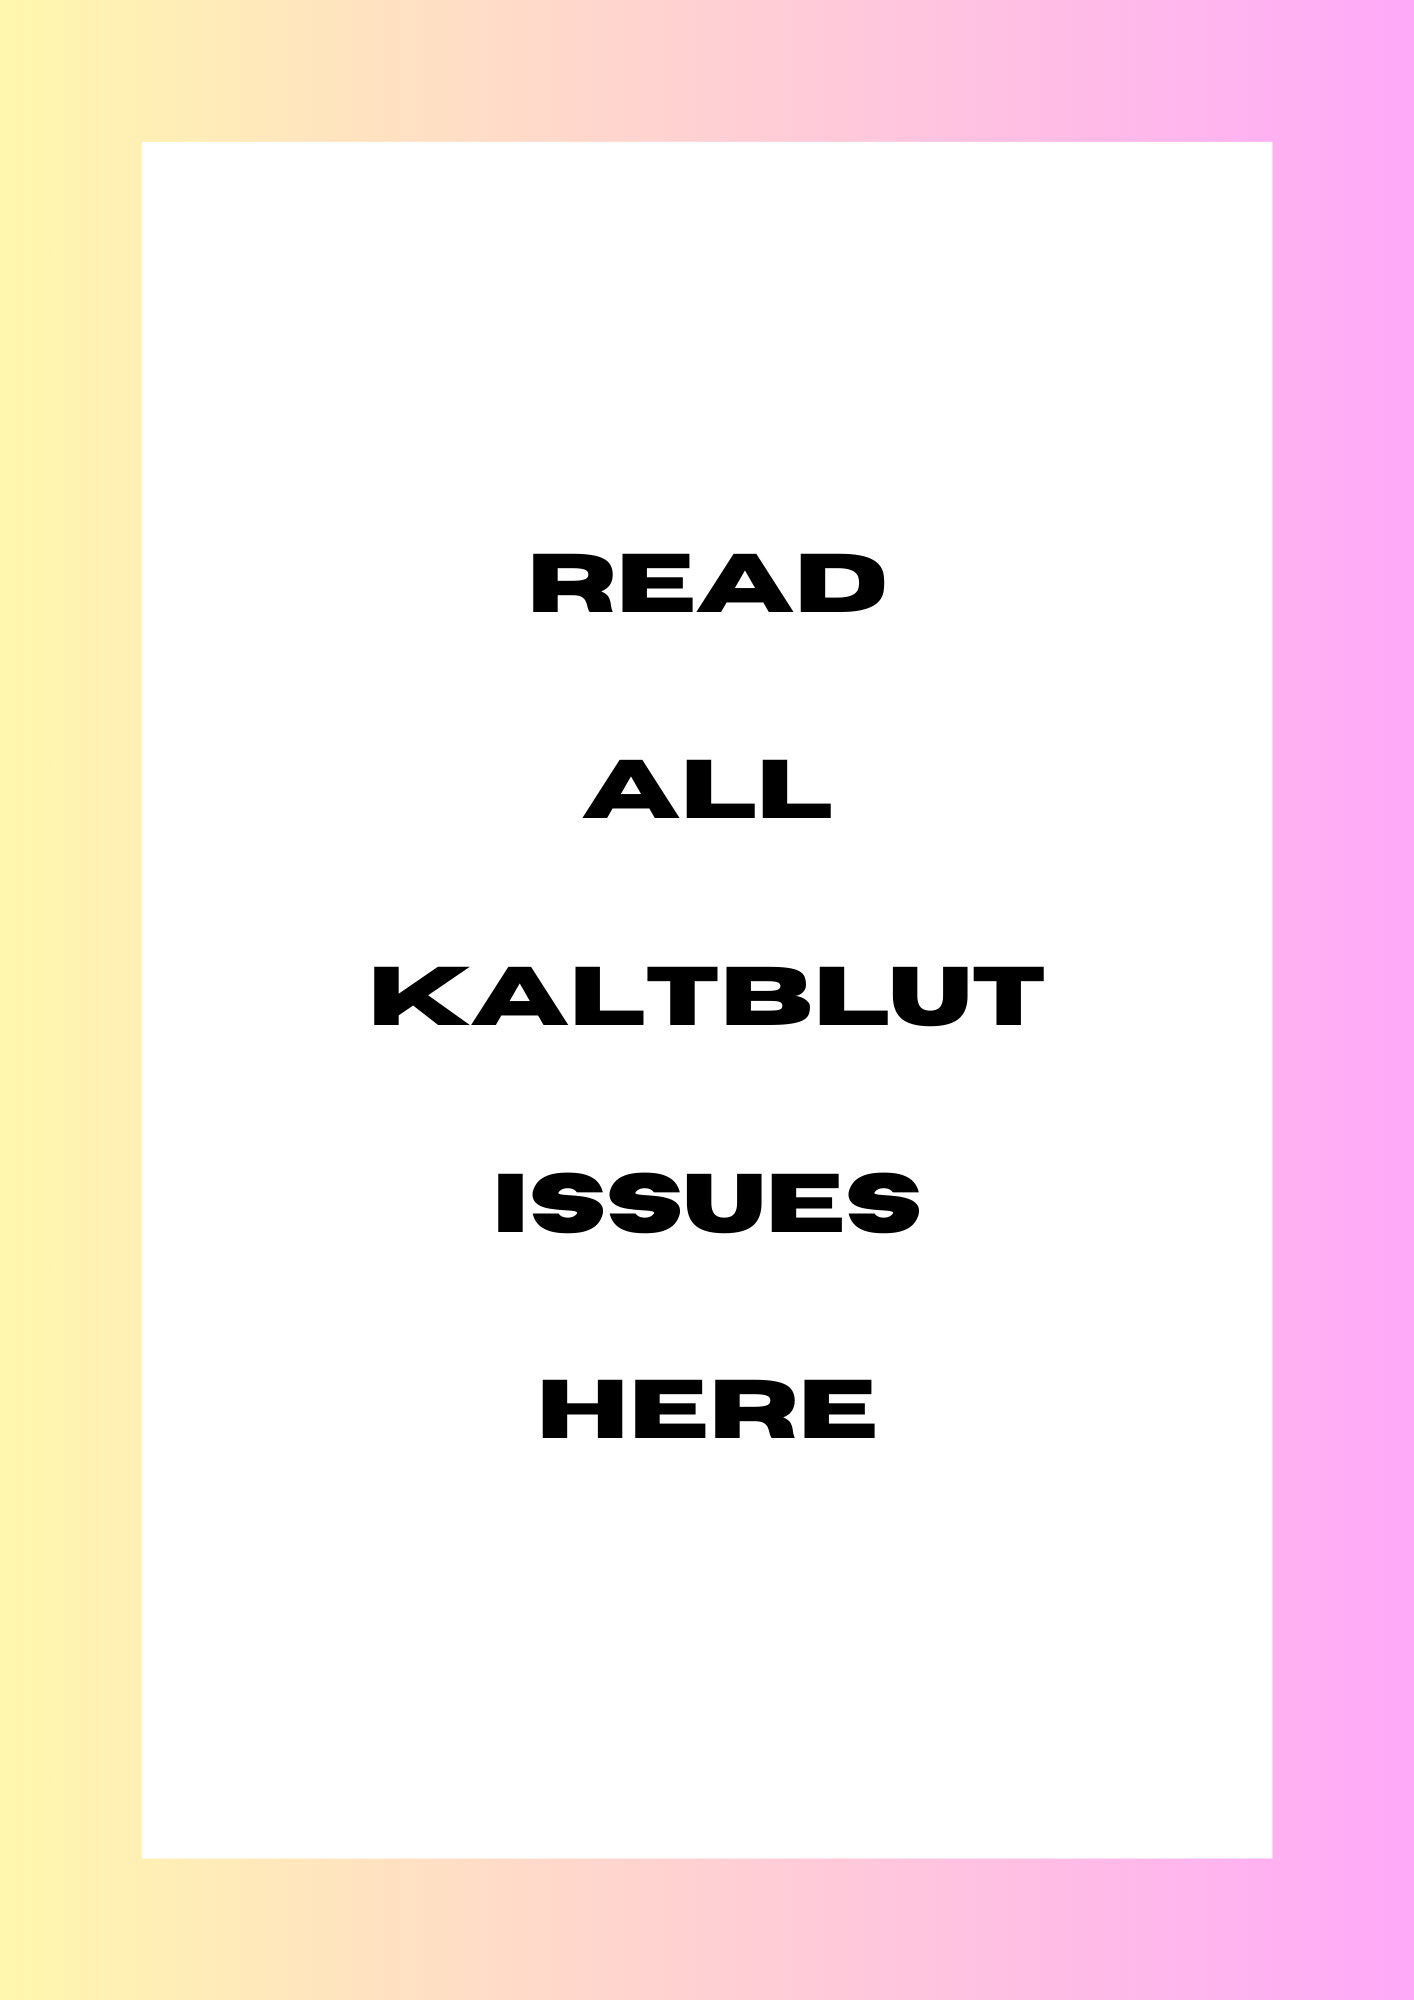 READ ALL ISSUES HERE.png